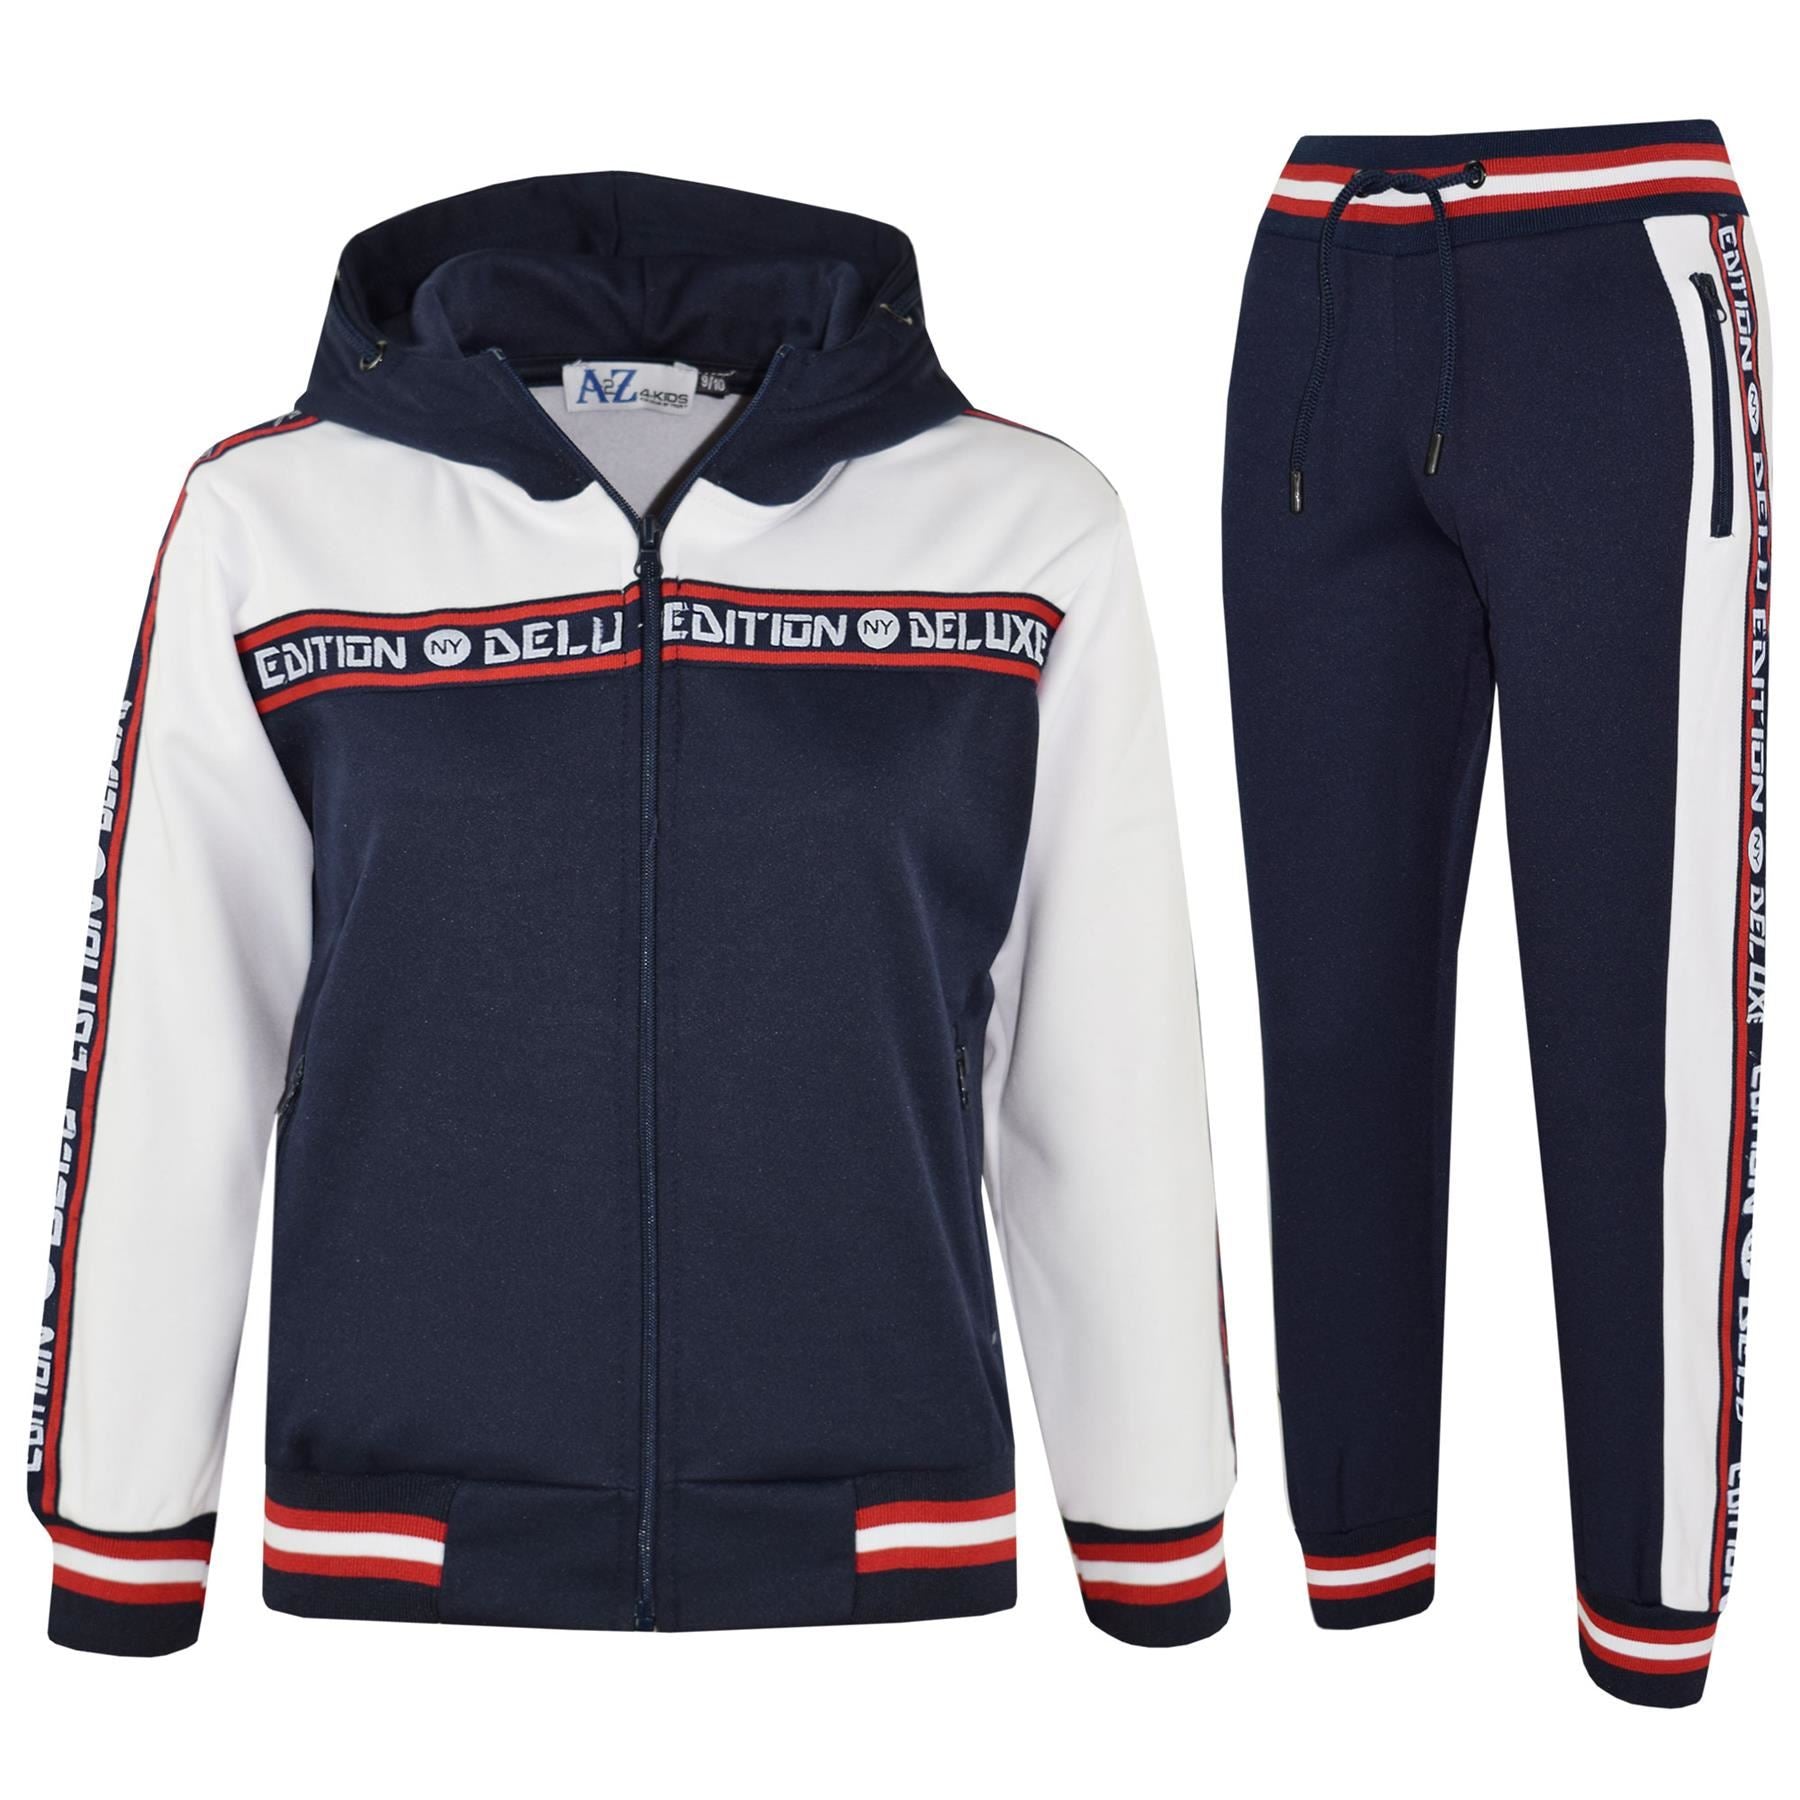 Girls Boys Unisex NY Navy Deluxe Edition Taped Hooded Tracksuit